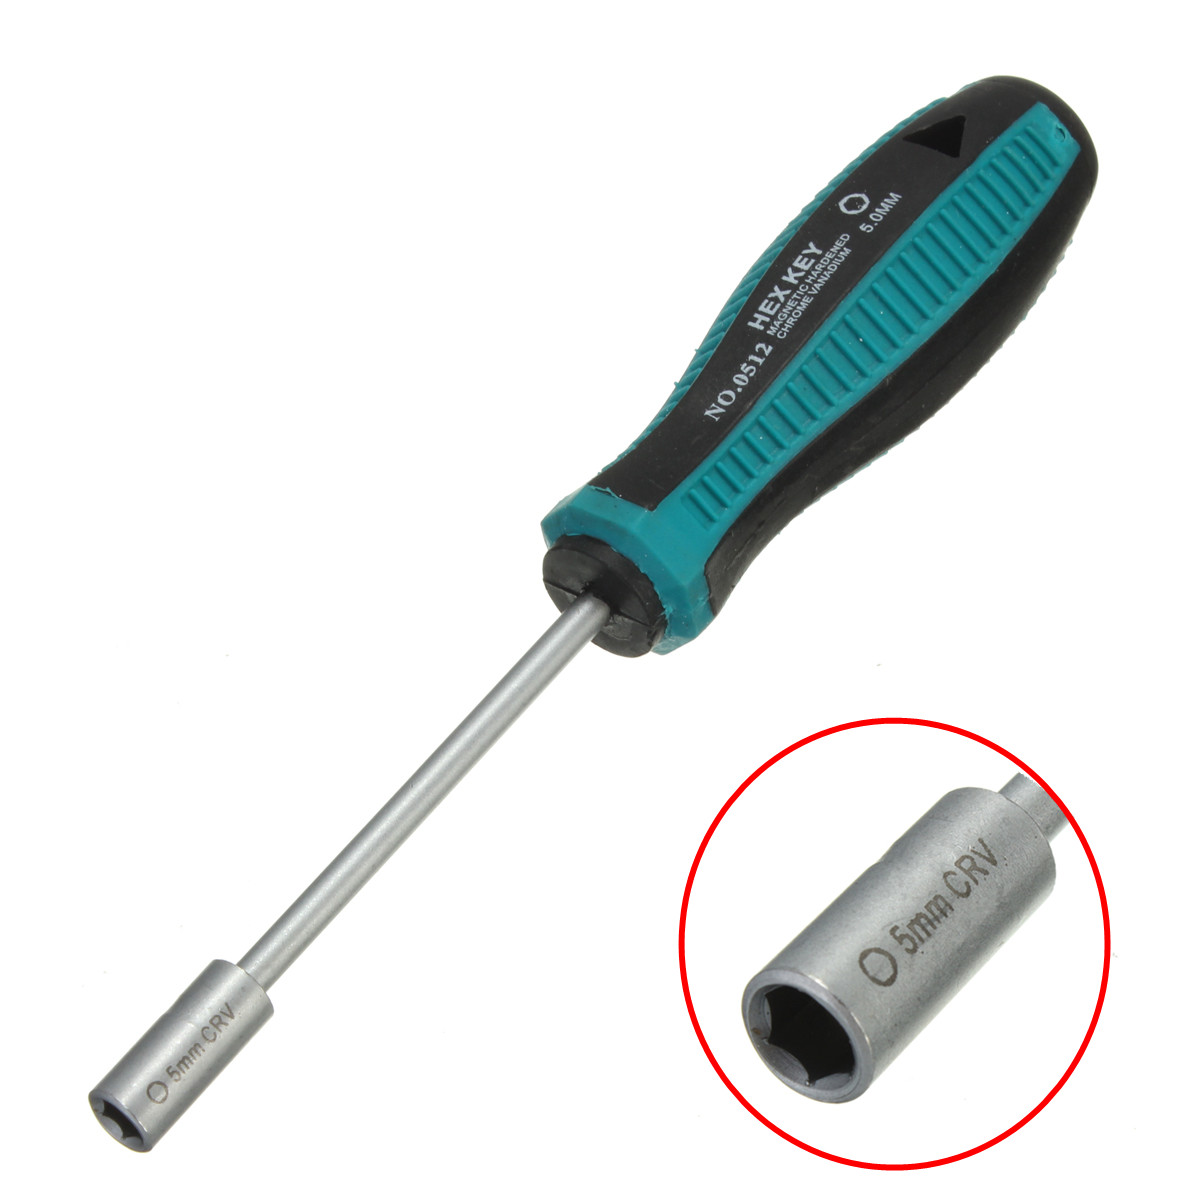 two types of screwdrivers